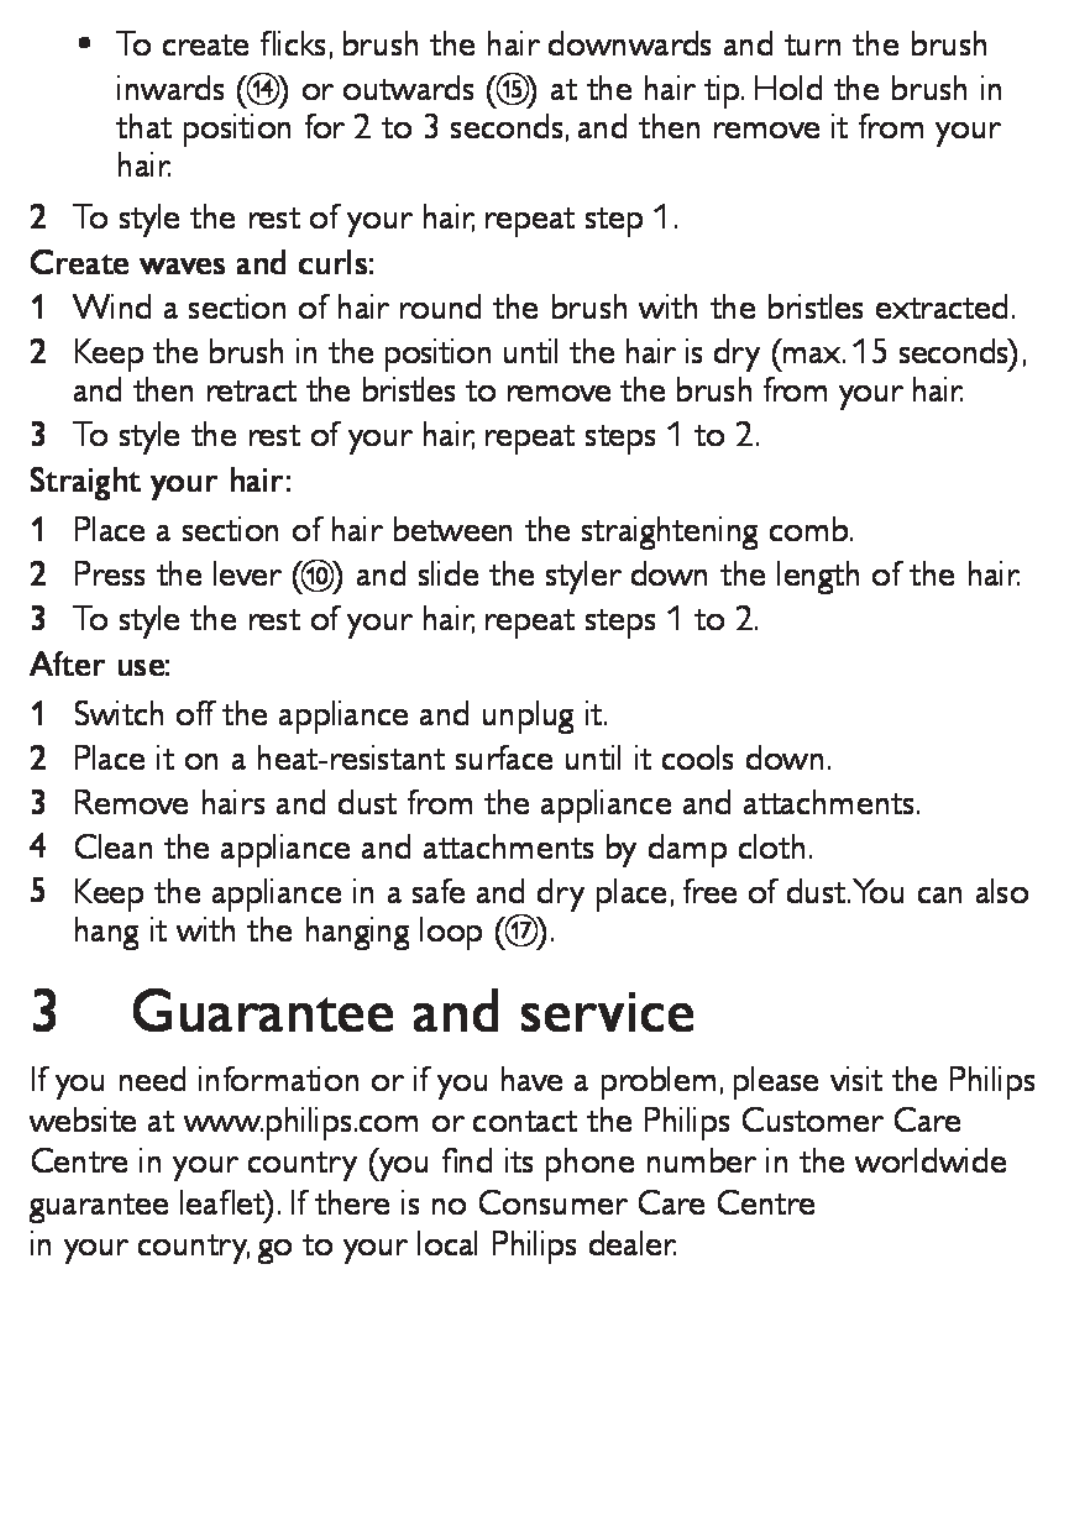 Philips HP8651, HP8650 user manual Guarantee and service, Wind a section of hair round the brush with the bristles extracted 